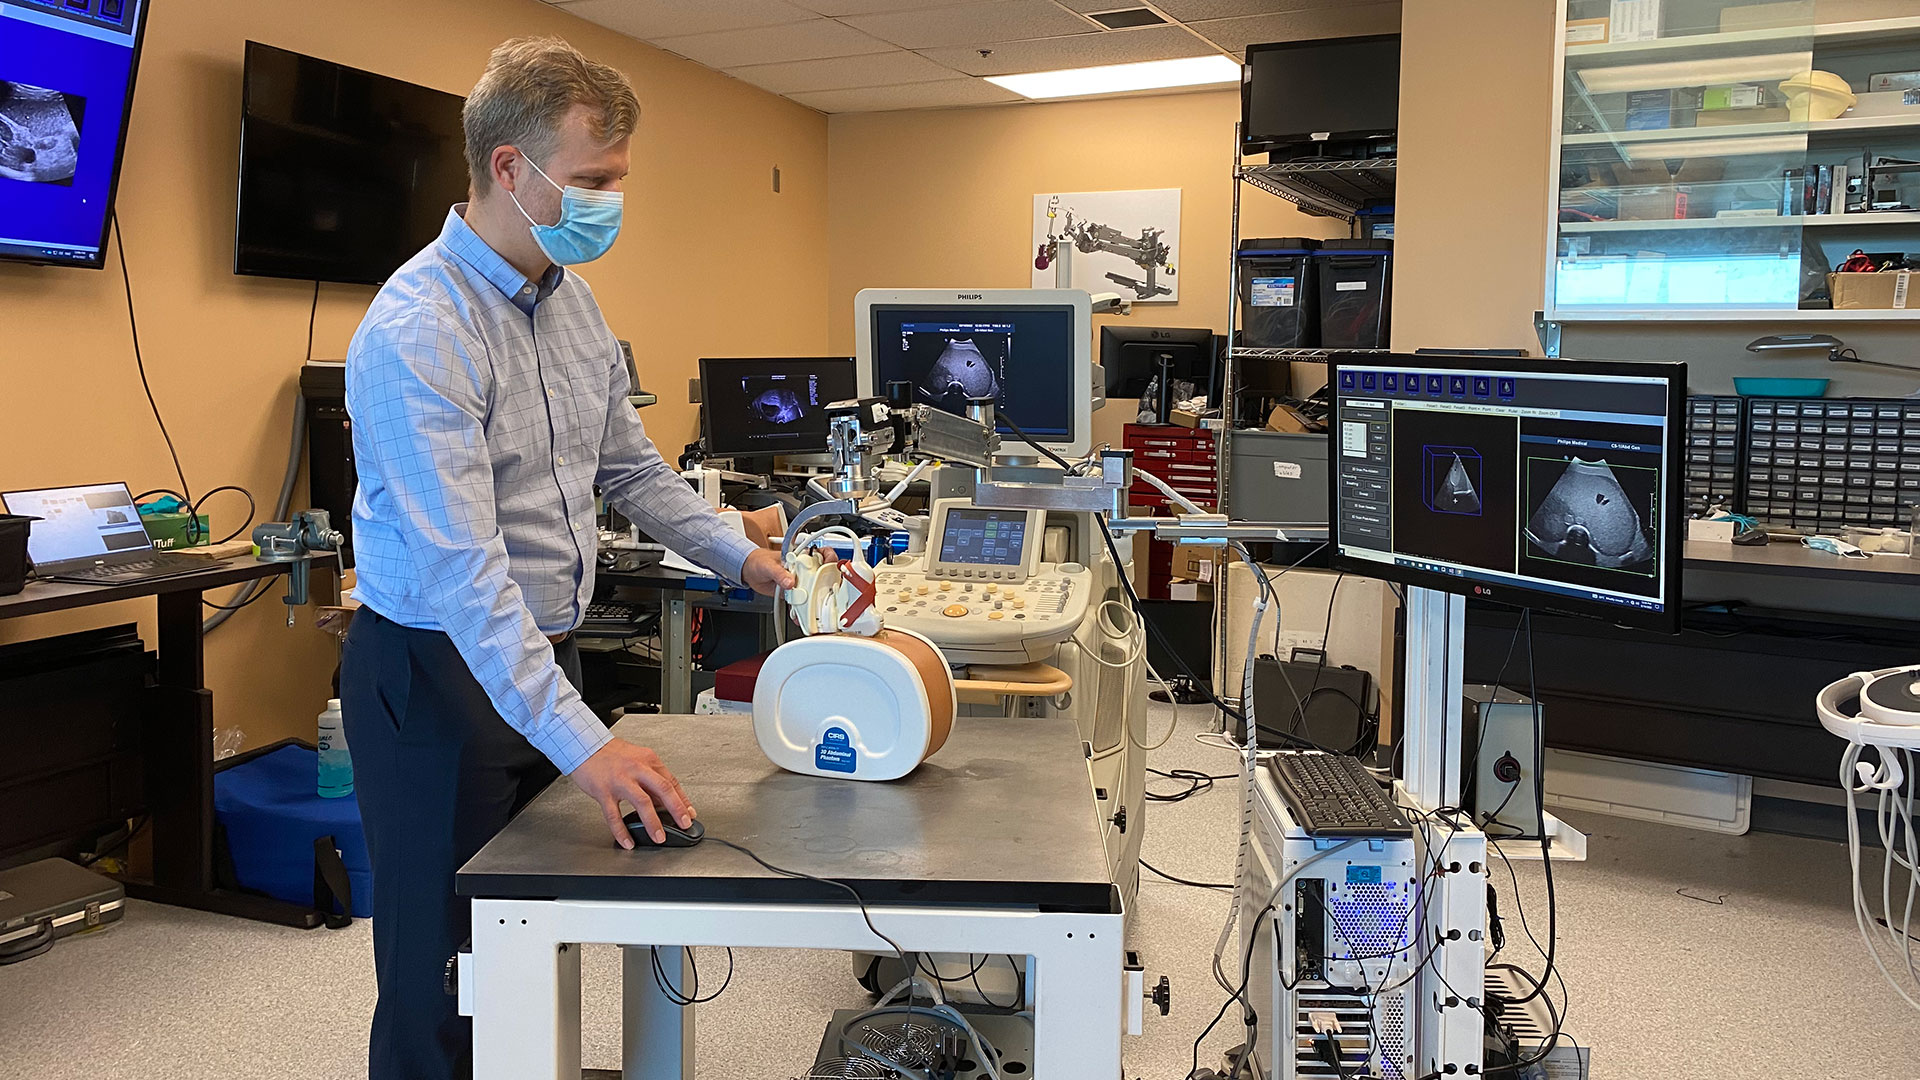 Dr. Derek Cool demonstrates the 3D ultrasound device at the Robarts Research Institute at Western University in London, Ont.